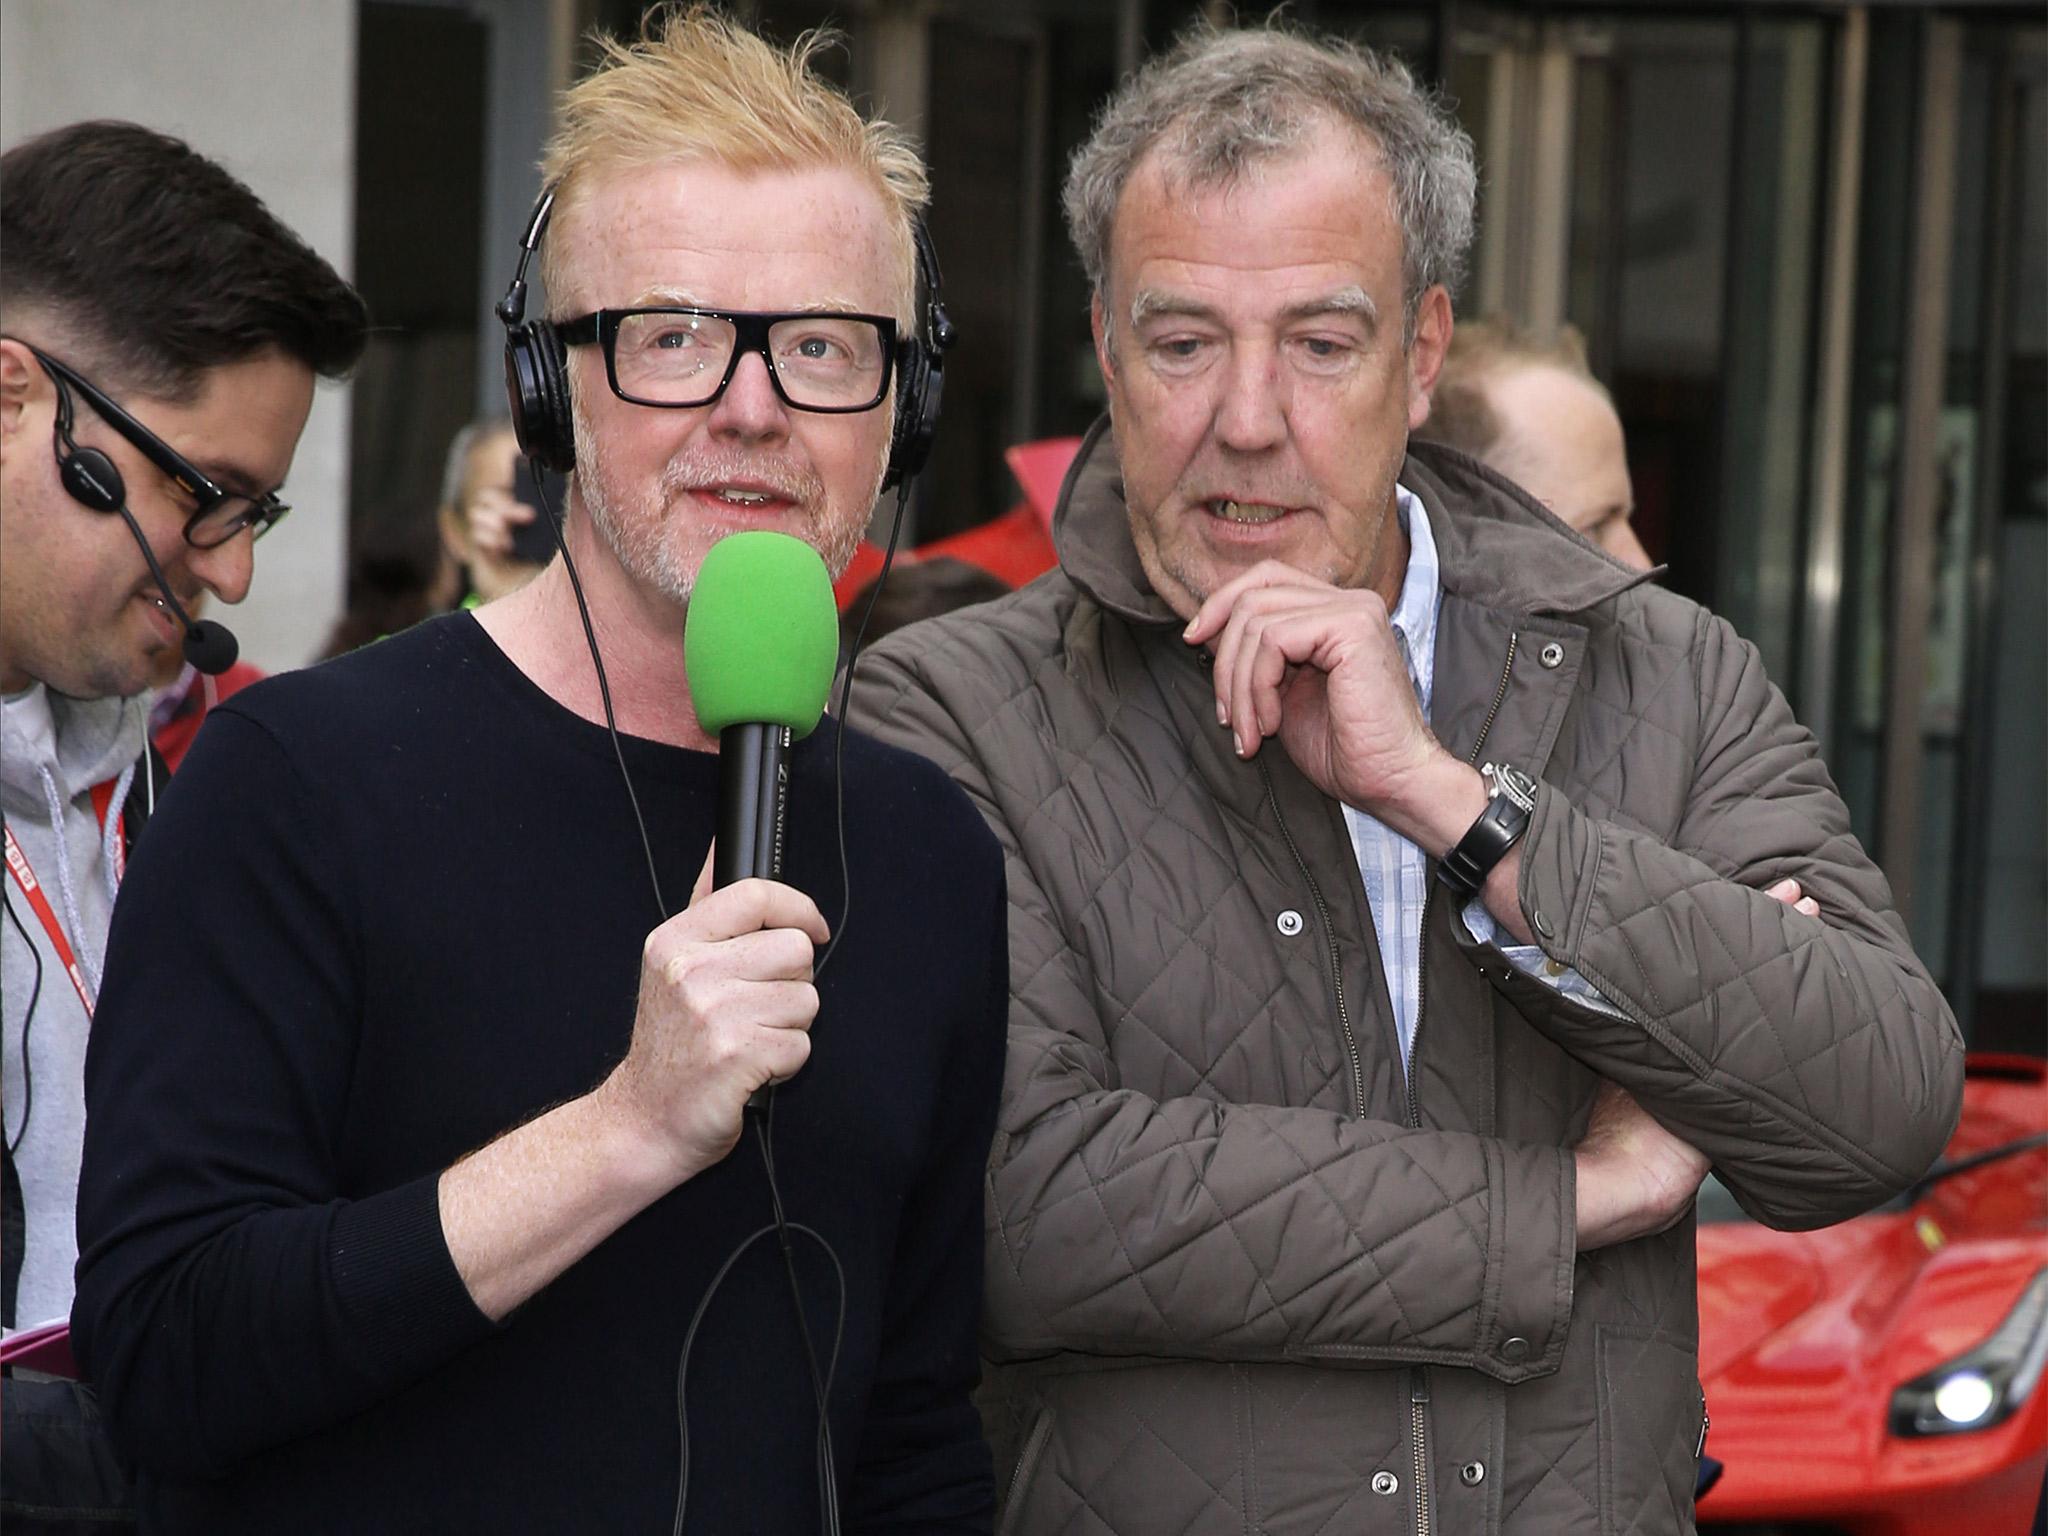 Chris Evans with Jeremy Clarkson outside BBC Radio 2 Studios last month